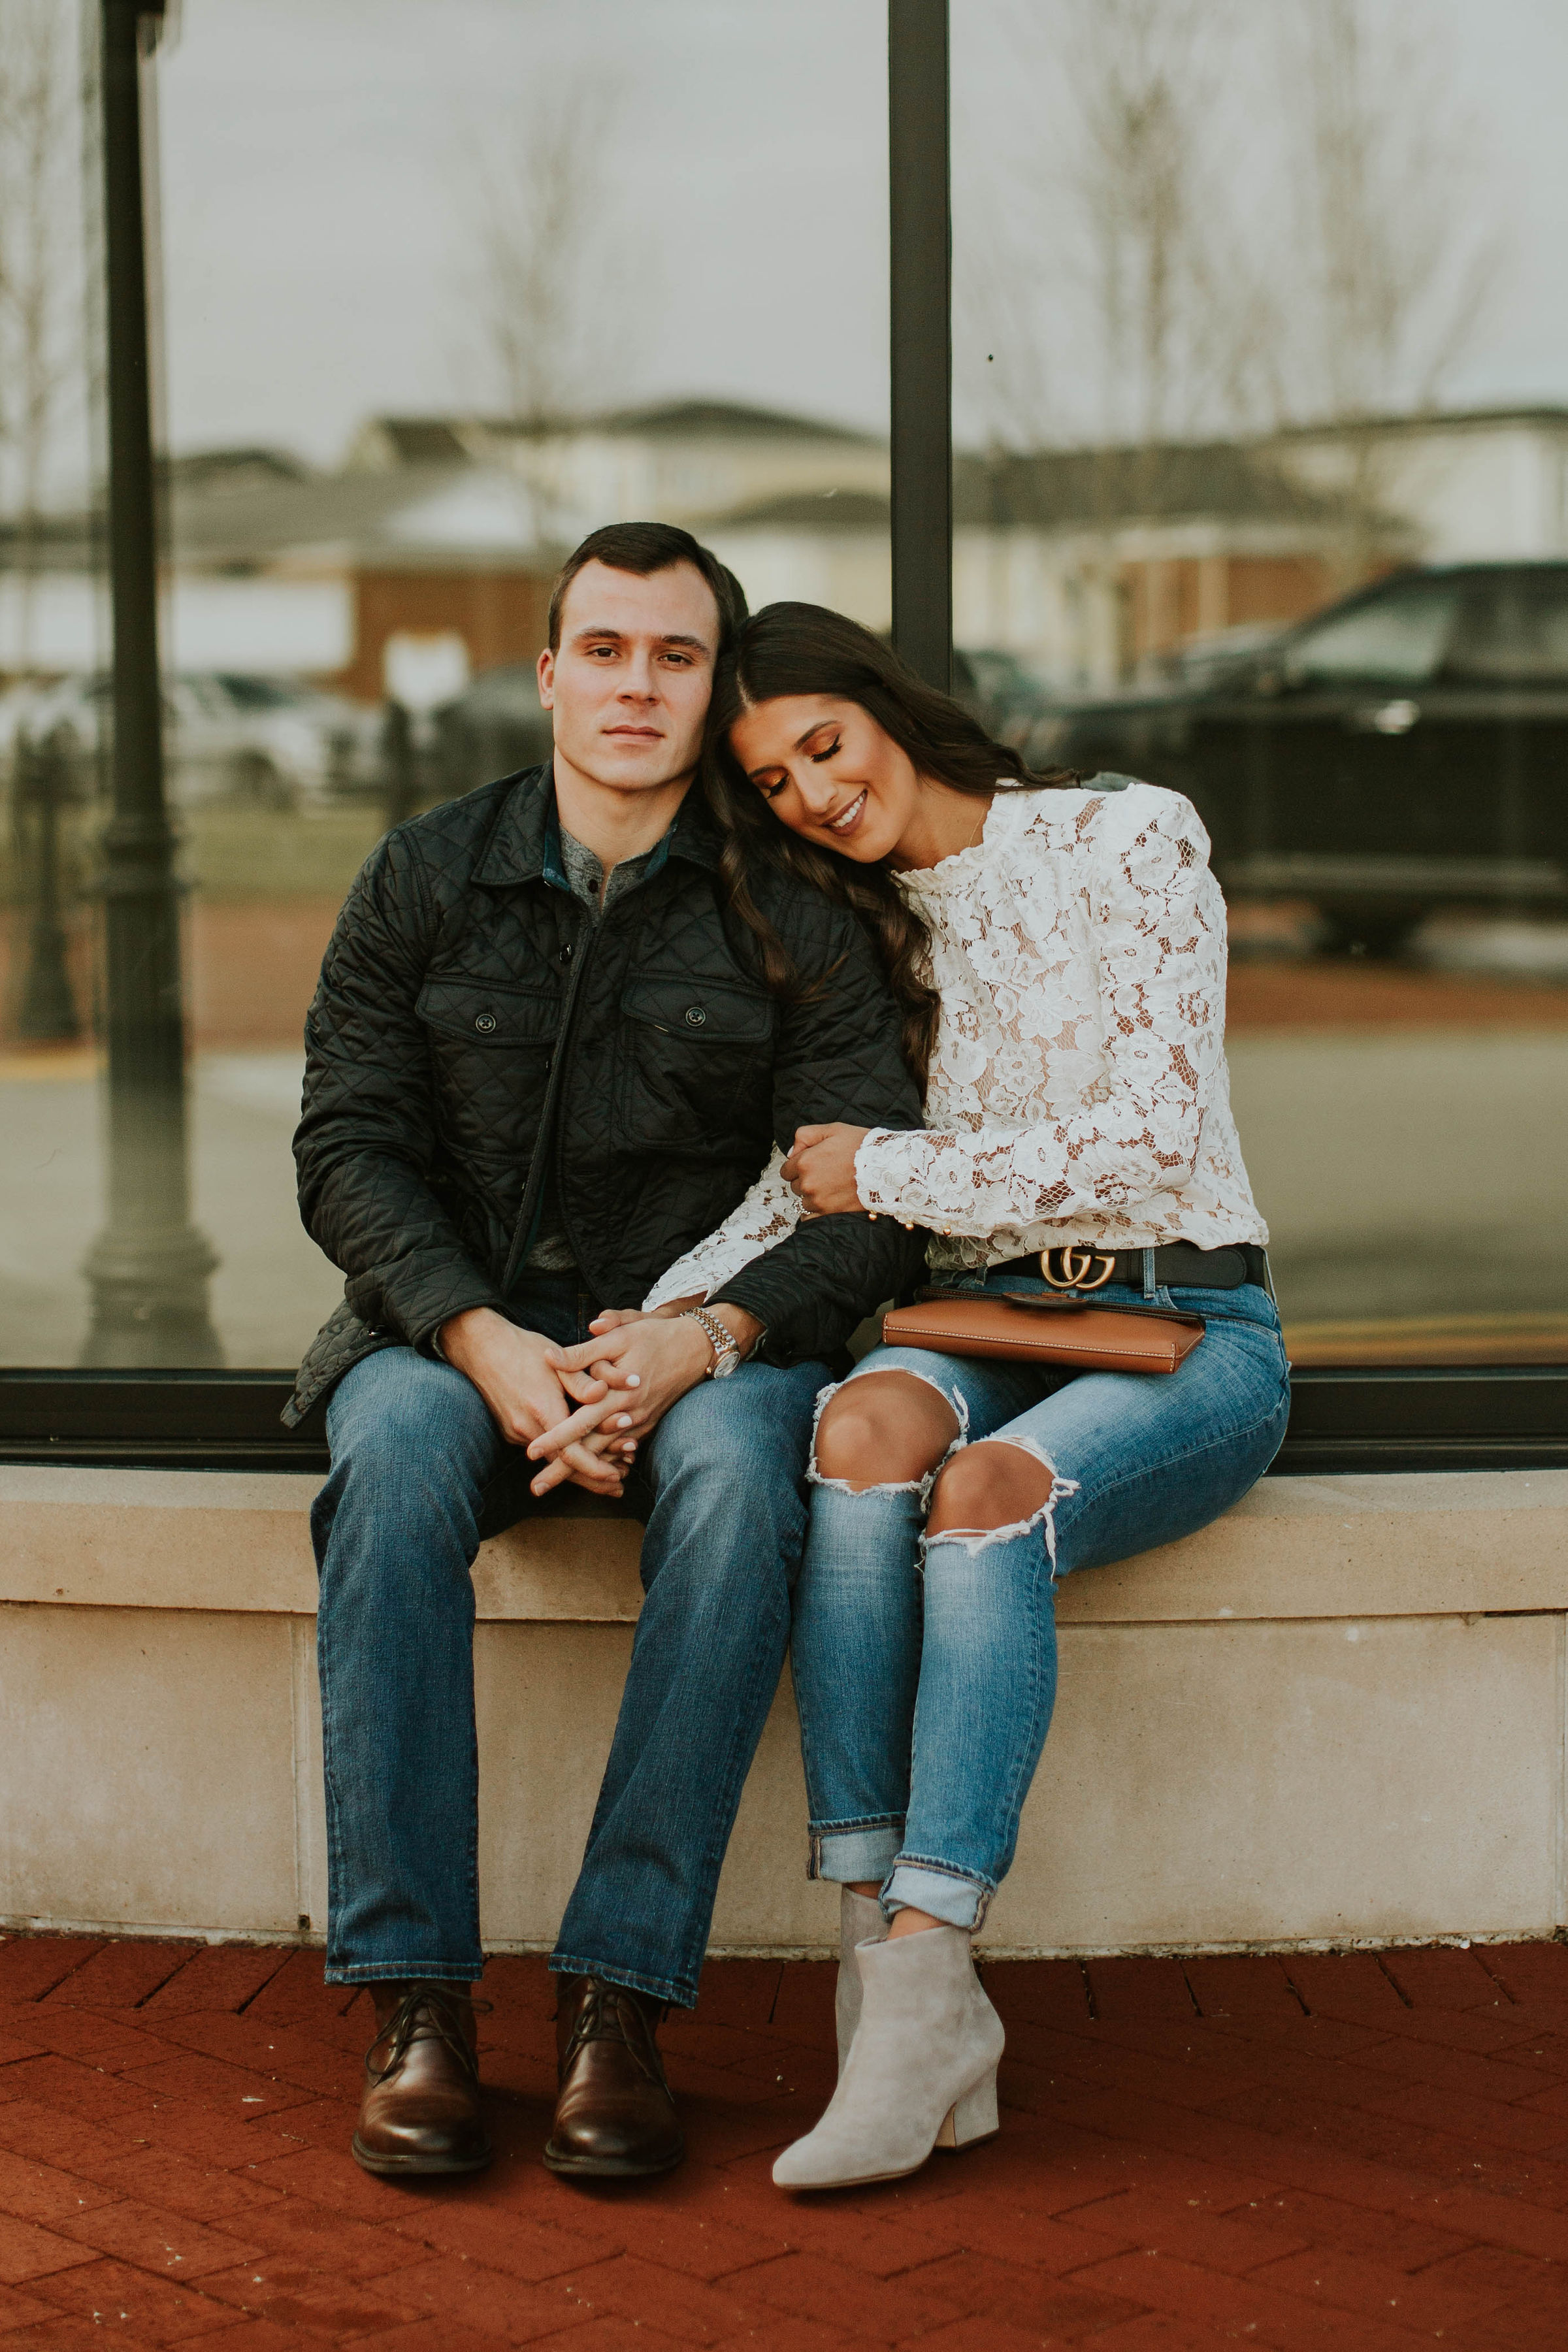 couples style, spring booties, spring shoes, johnston and murphy, jordan white louisville kentucky, grace white, a southern drawl, lace top, lace puff sleeves top, feminine outfit, feminine look, men's style, men's quilted jacket, wayf puff sleeve lace top